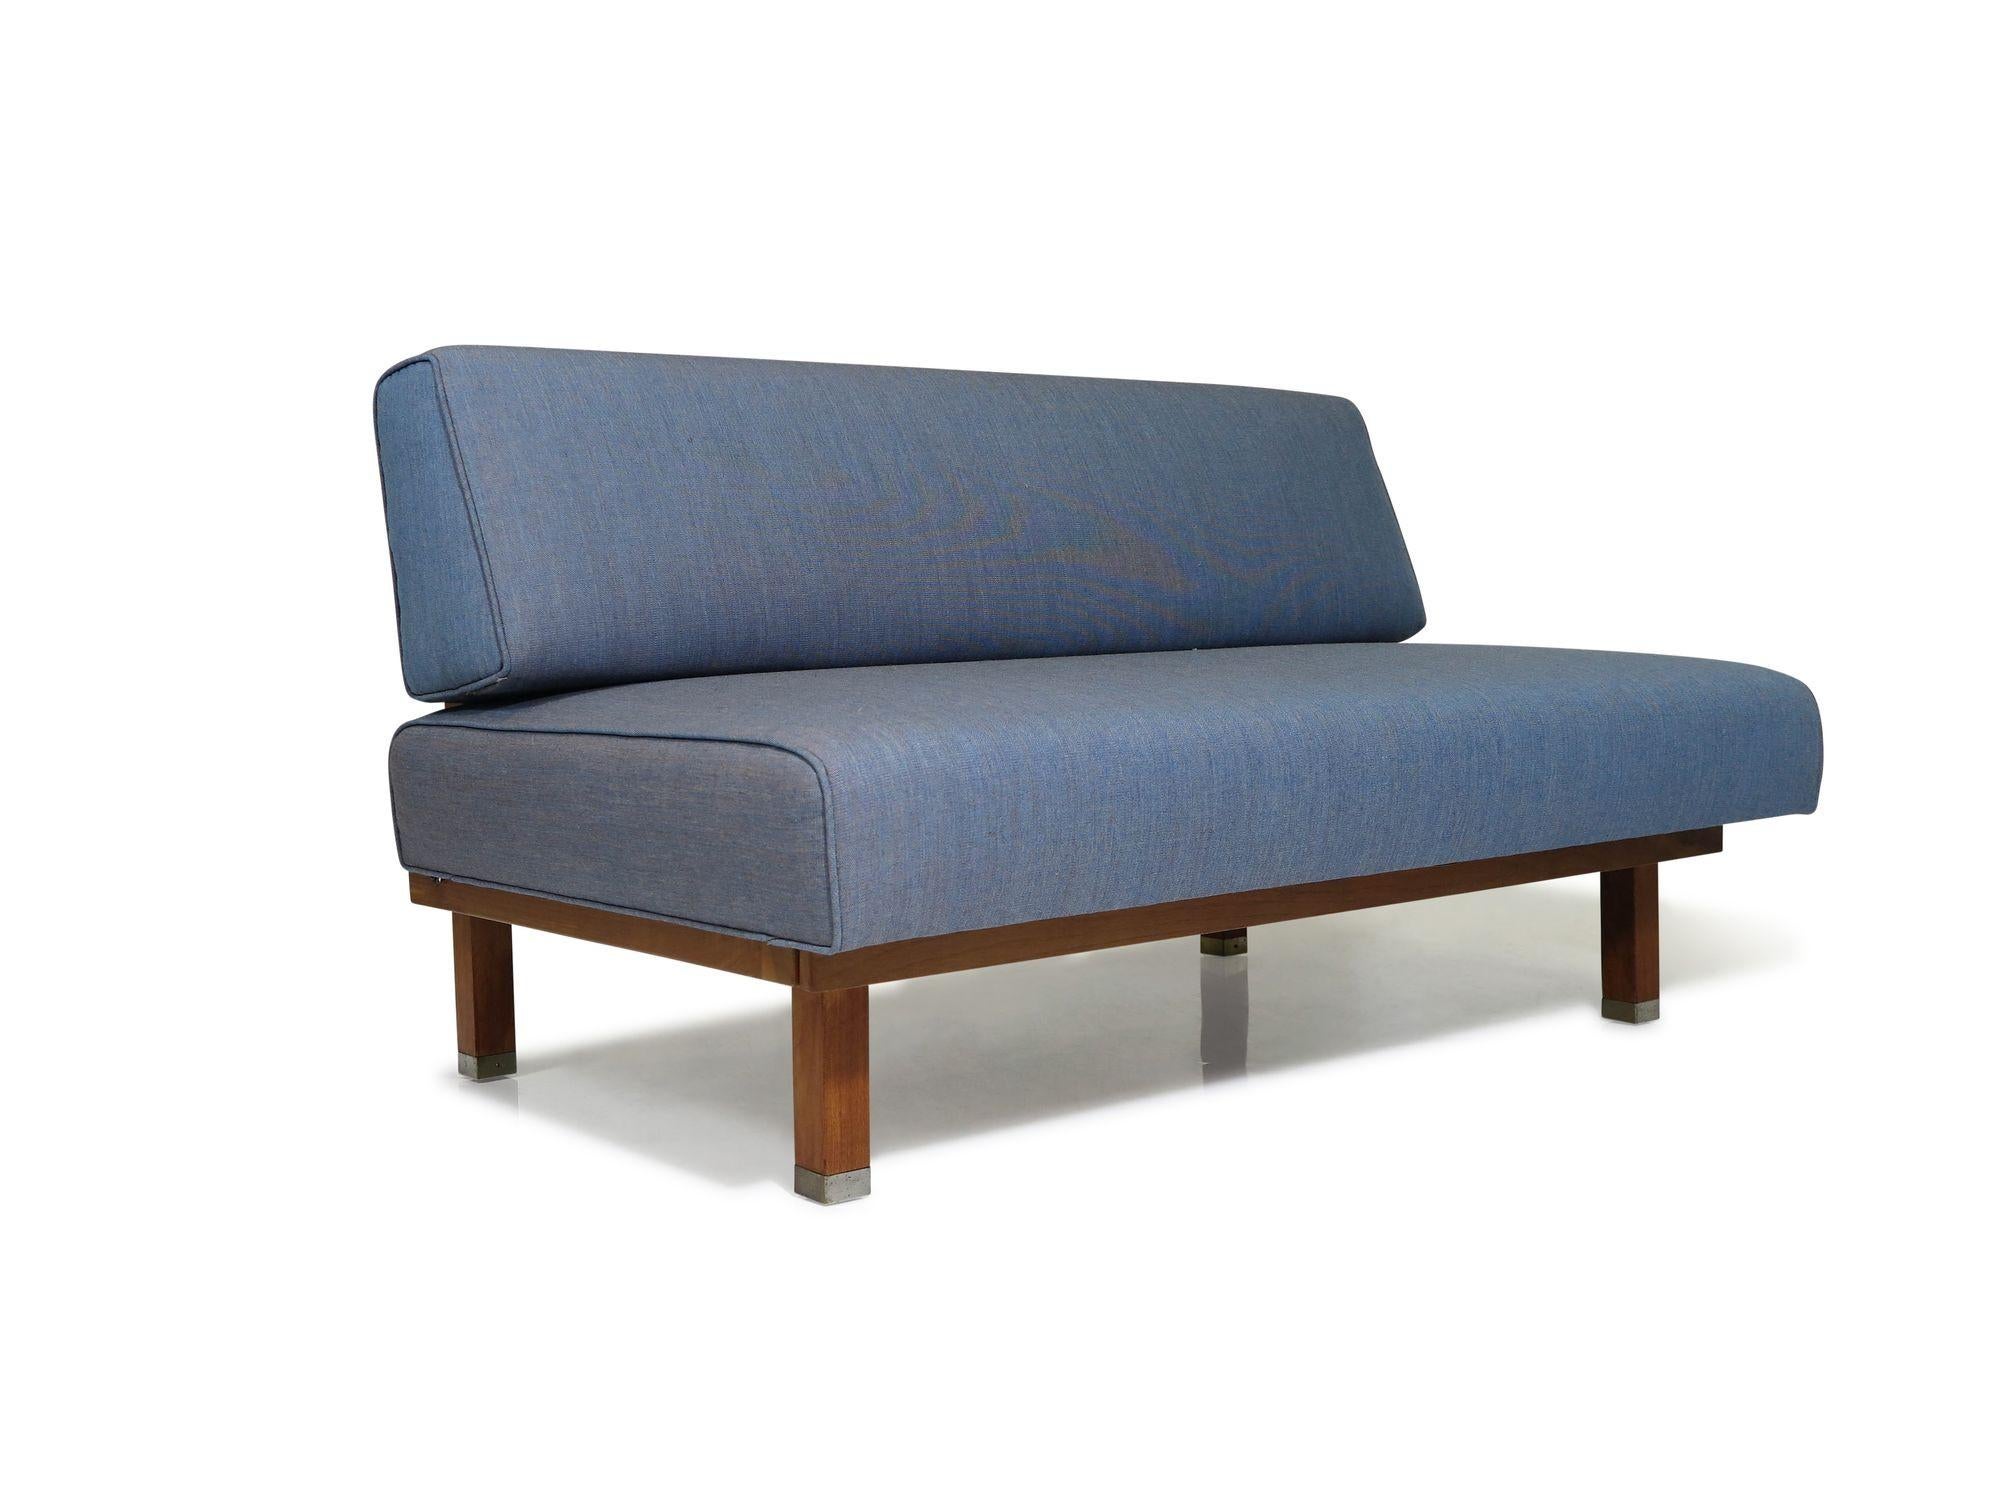 Mid-Century armless settee crafted with a solid walnut frame, newly upholstered in a classic blue textile, raised on squared legs with brass caps. The loveseat is in excellent condition, displaying only minor signs of age and use.

Measurements
W